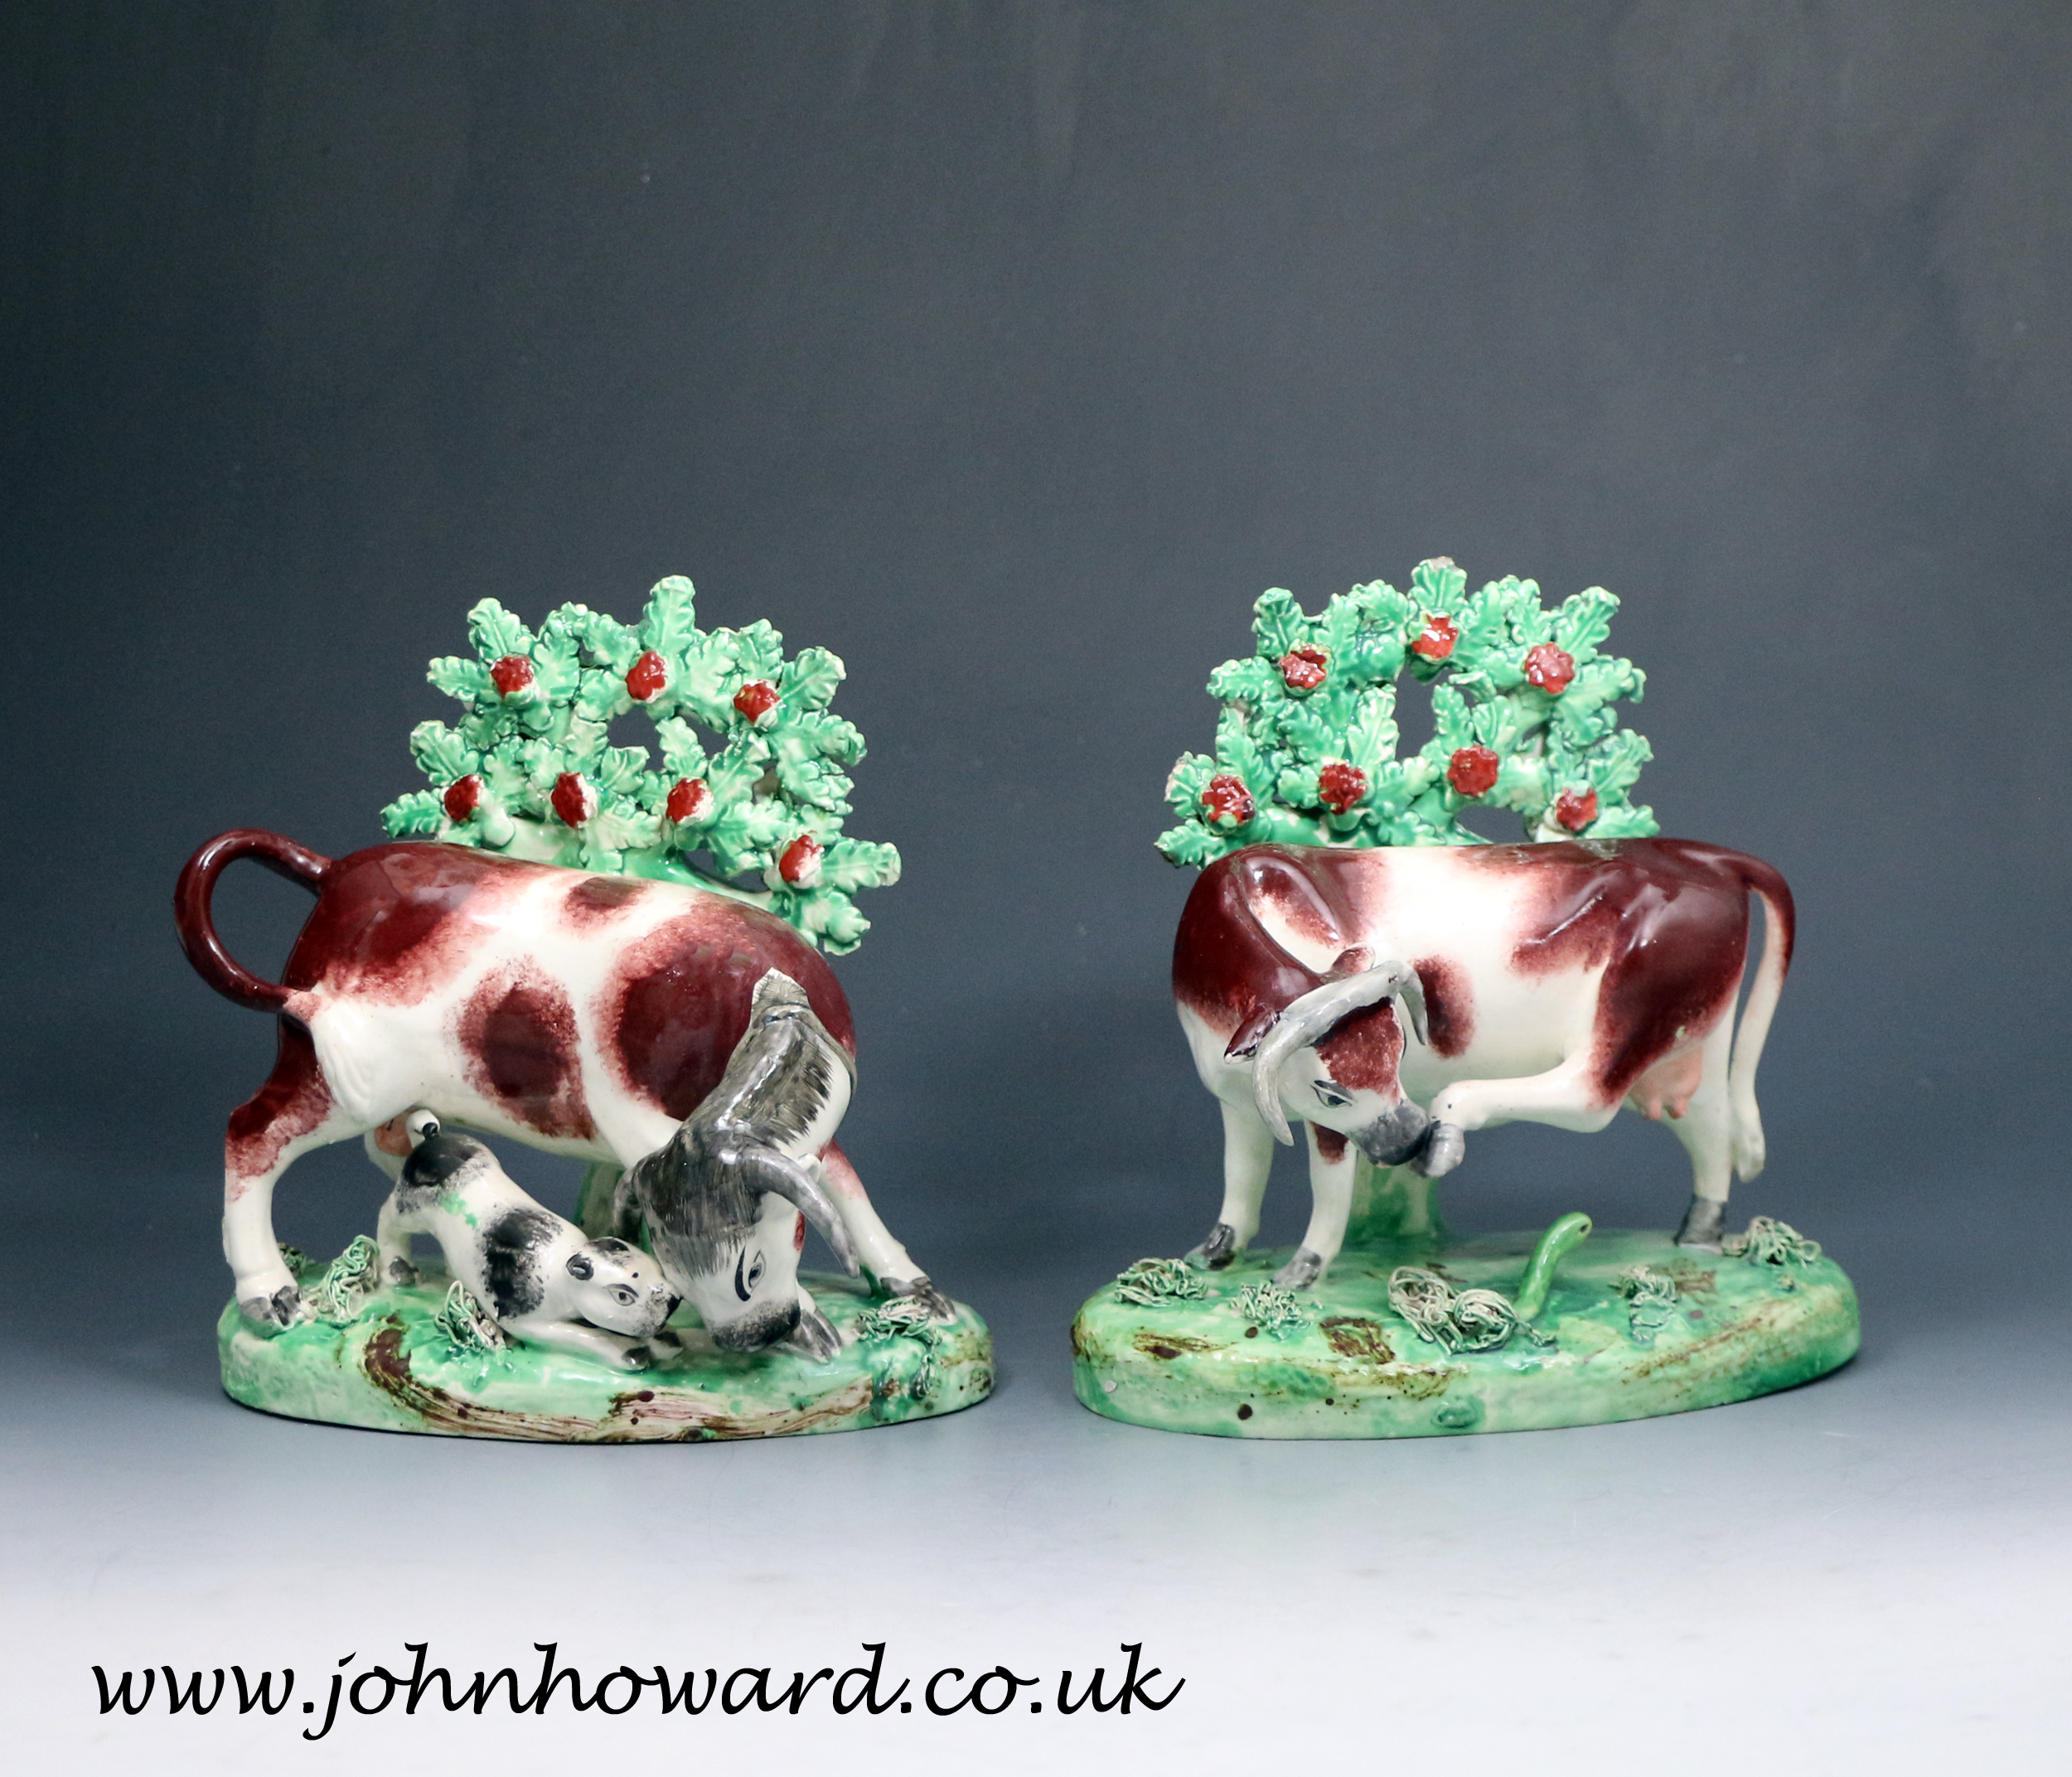 Staffordshire Red & White Cow with Floral Bocage Porcelain Vase Figurine 